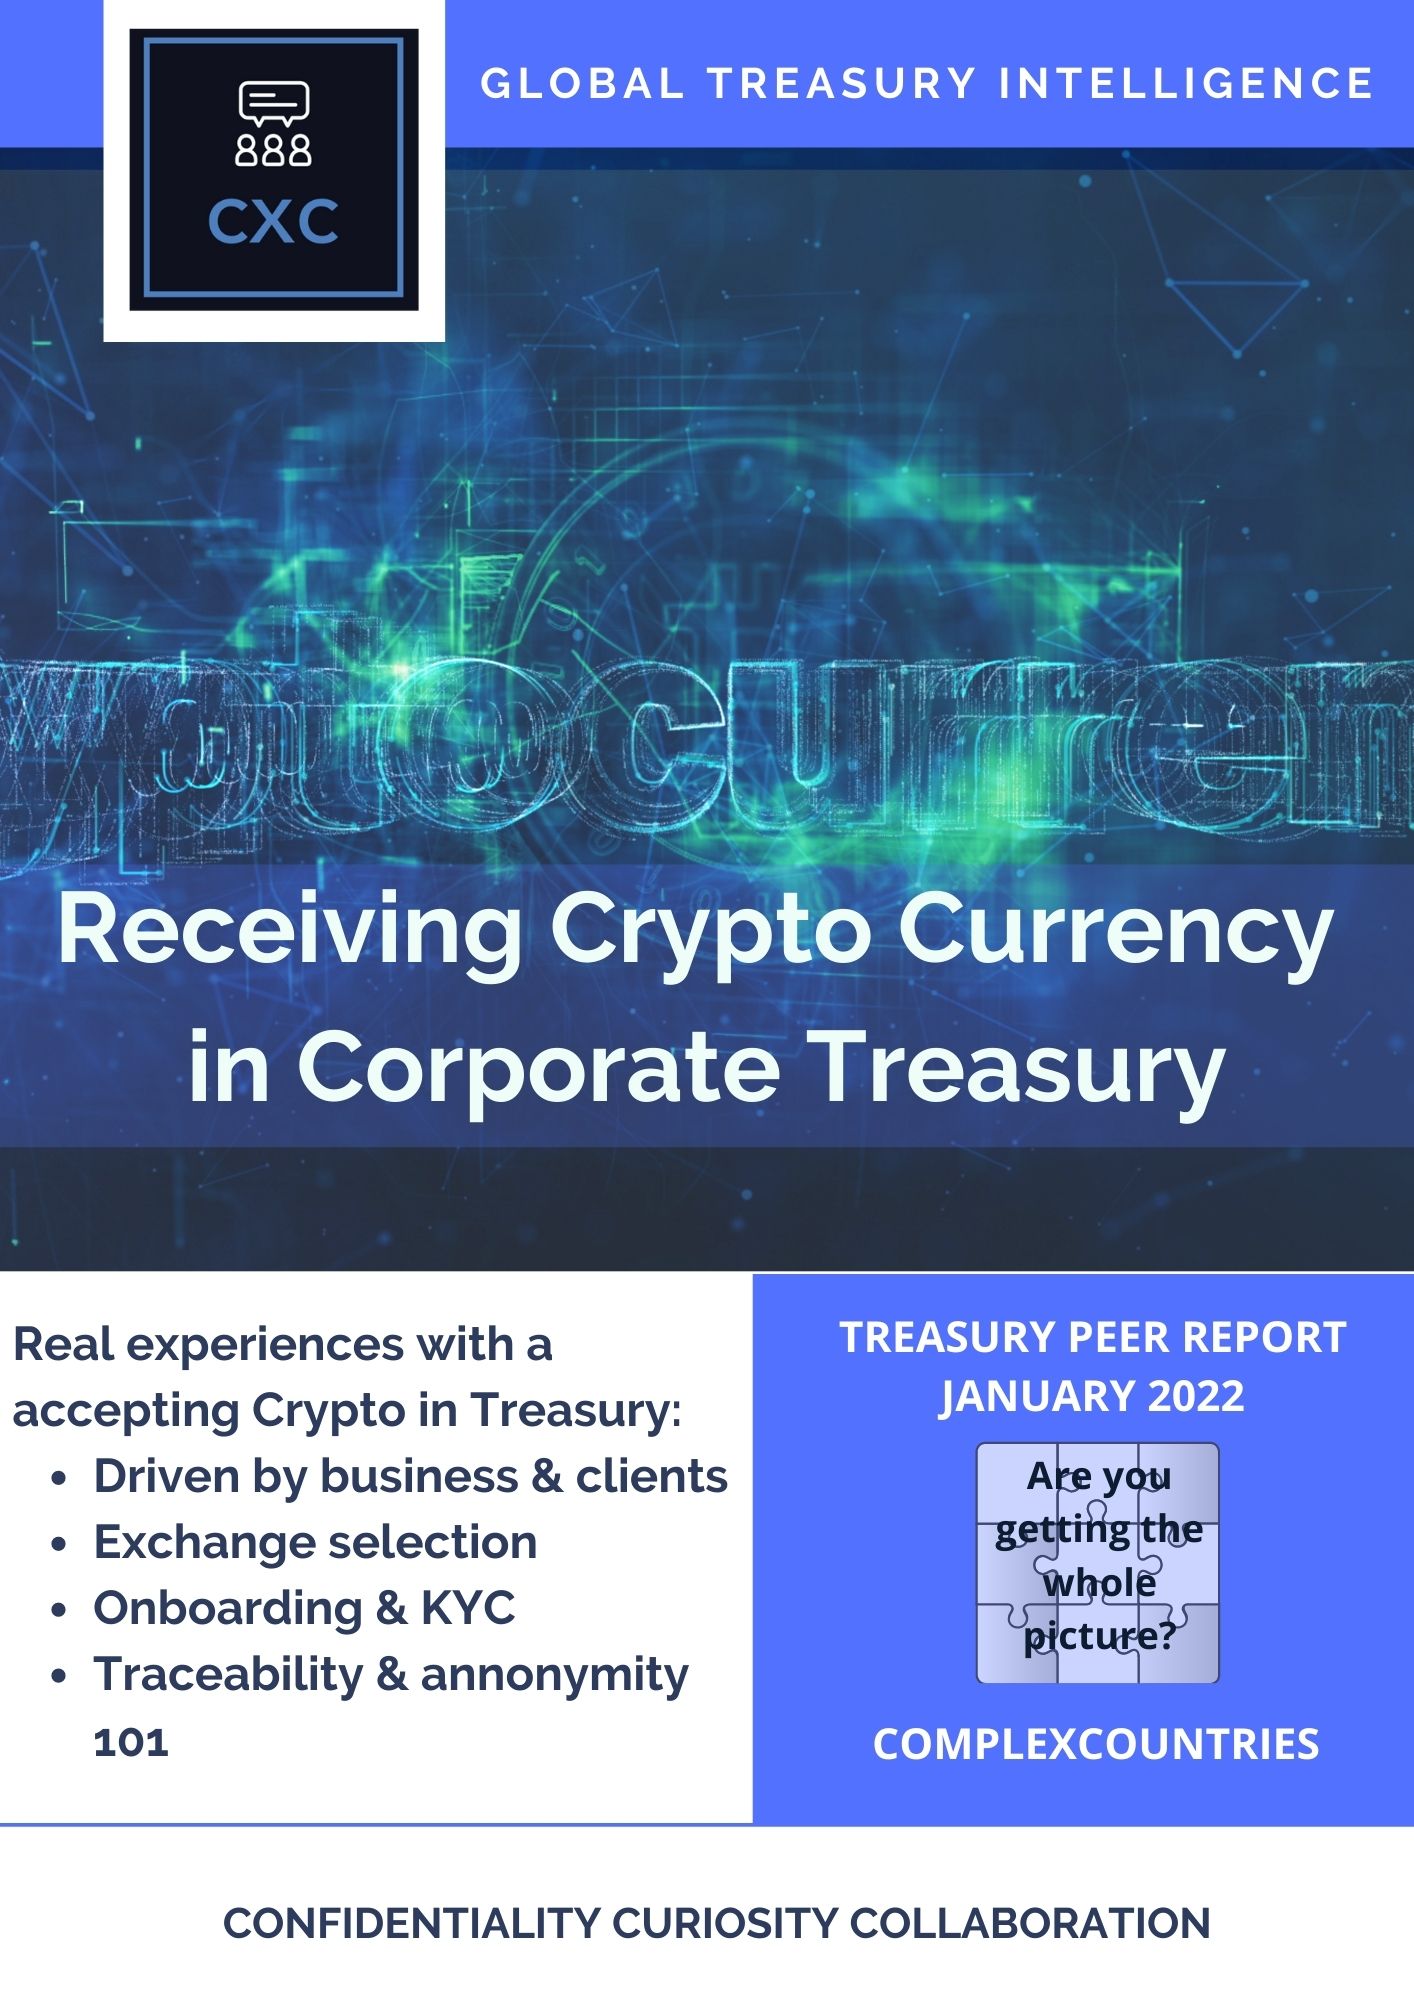 Accepting Crypto Currency in Corporate Treasury